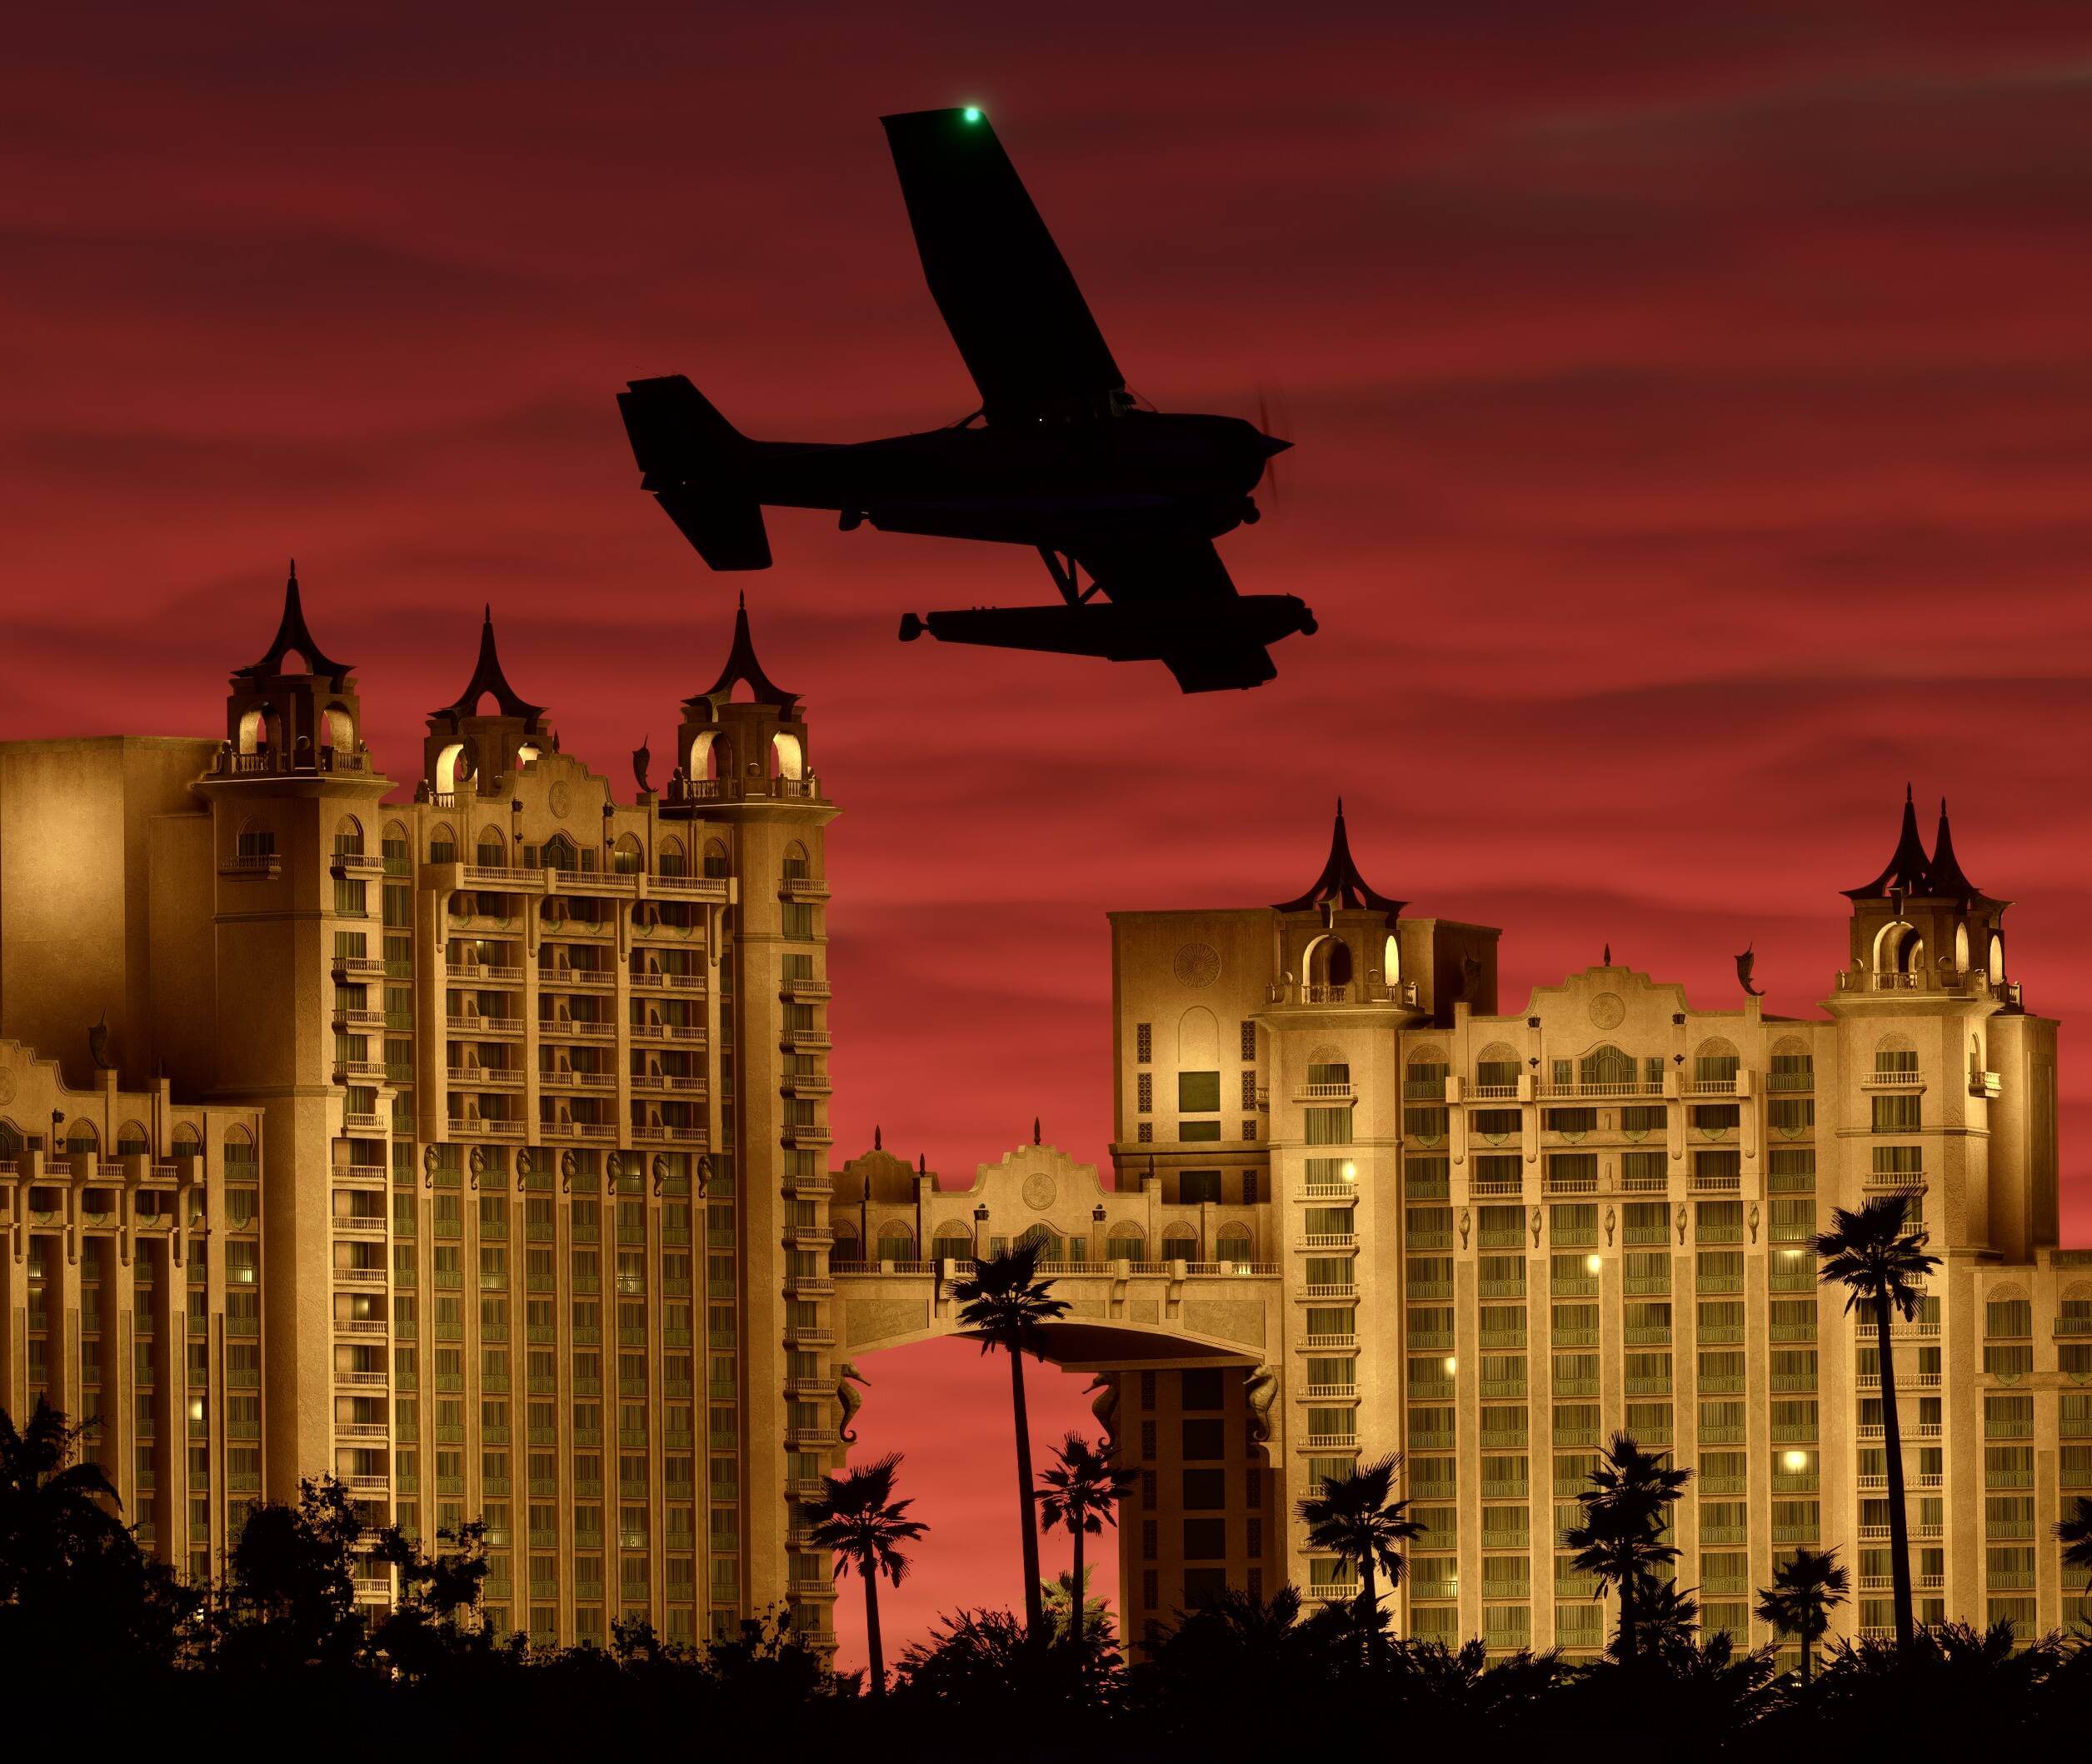 Red skies are cast behind the silhouette of an aircraft with high ride building lit up in gold behind.